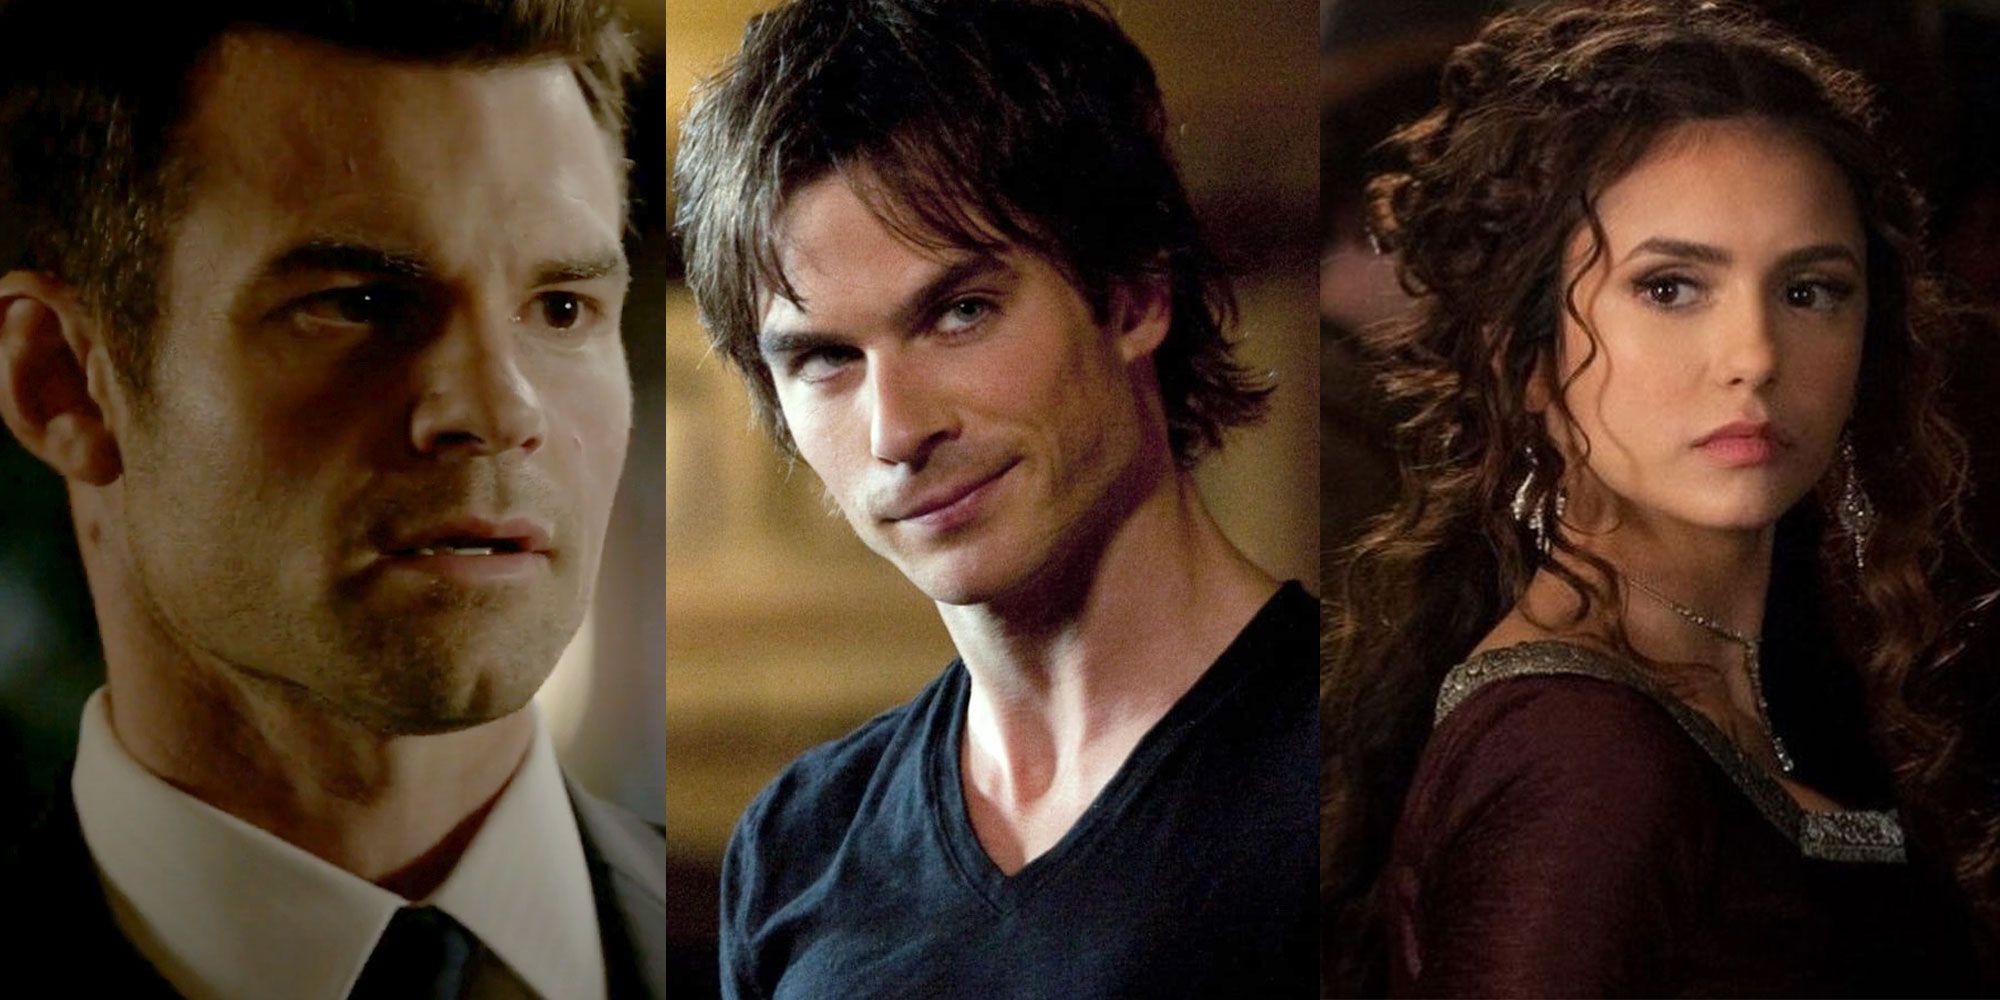 The Vampire Diaries: The 20 Best Episodes